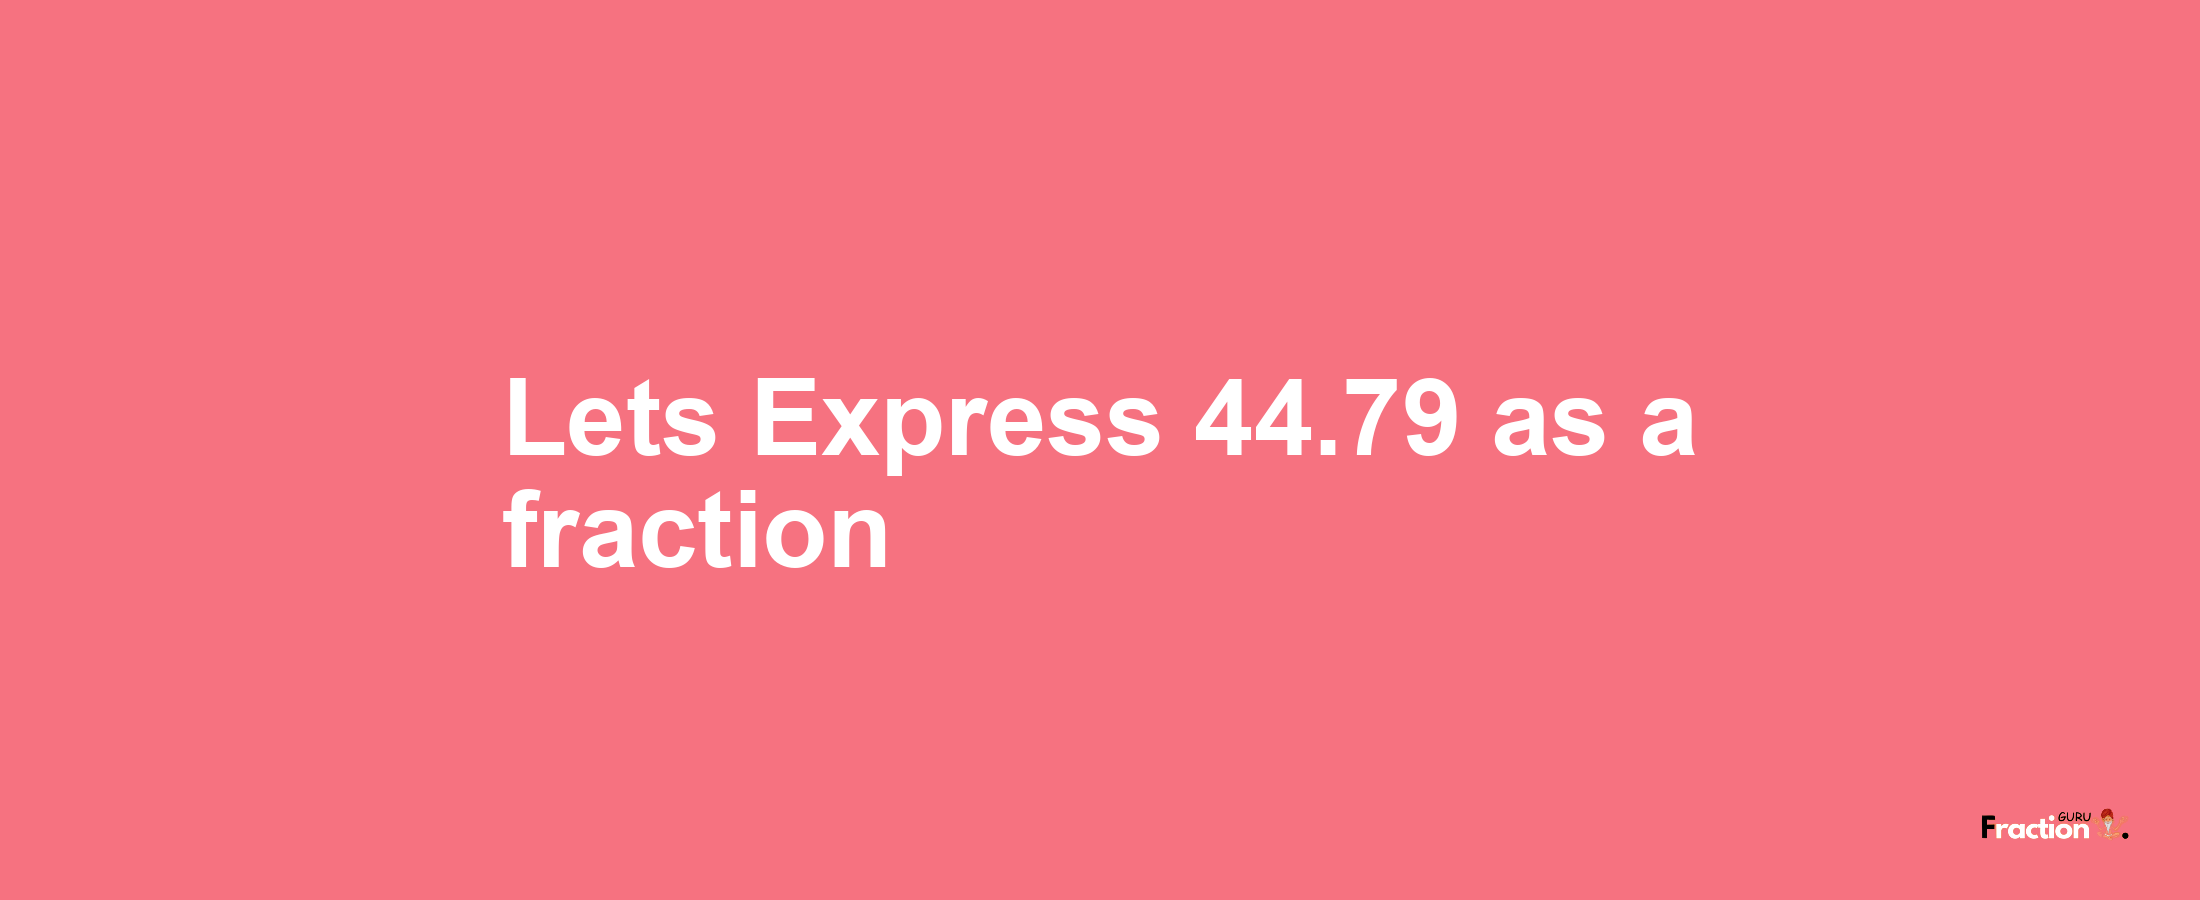 Lets Express 44.79 as afraction